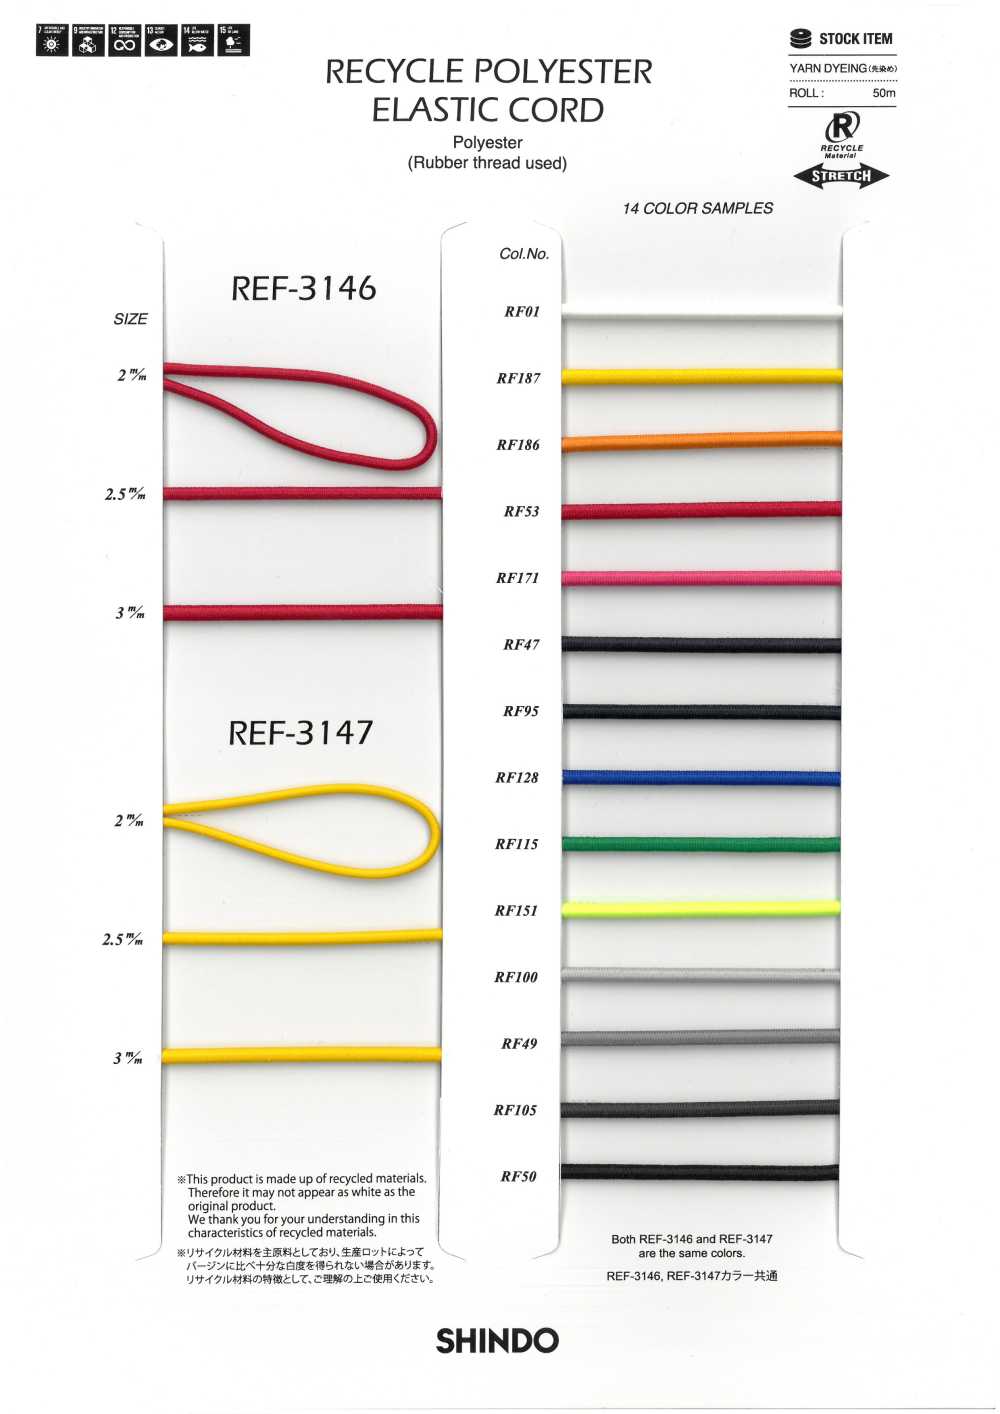 REF-3147 Recycled Polyester Elastic Cord (Hard Type)[Ribbon Tape Cord] SHINDO(SIC)